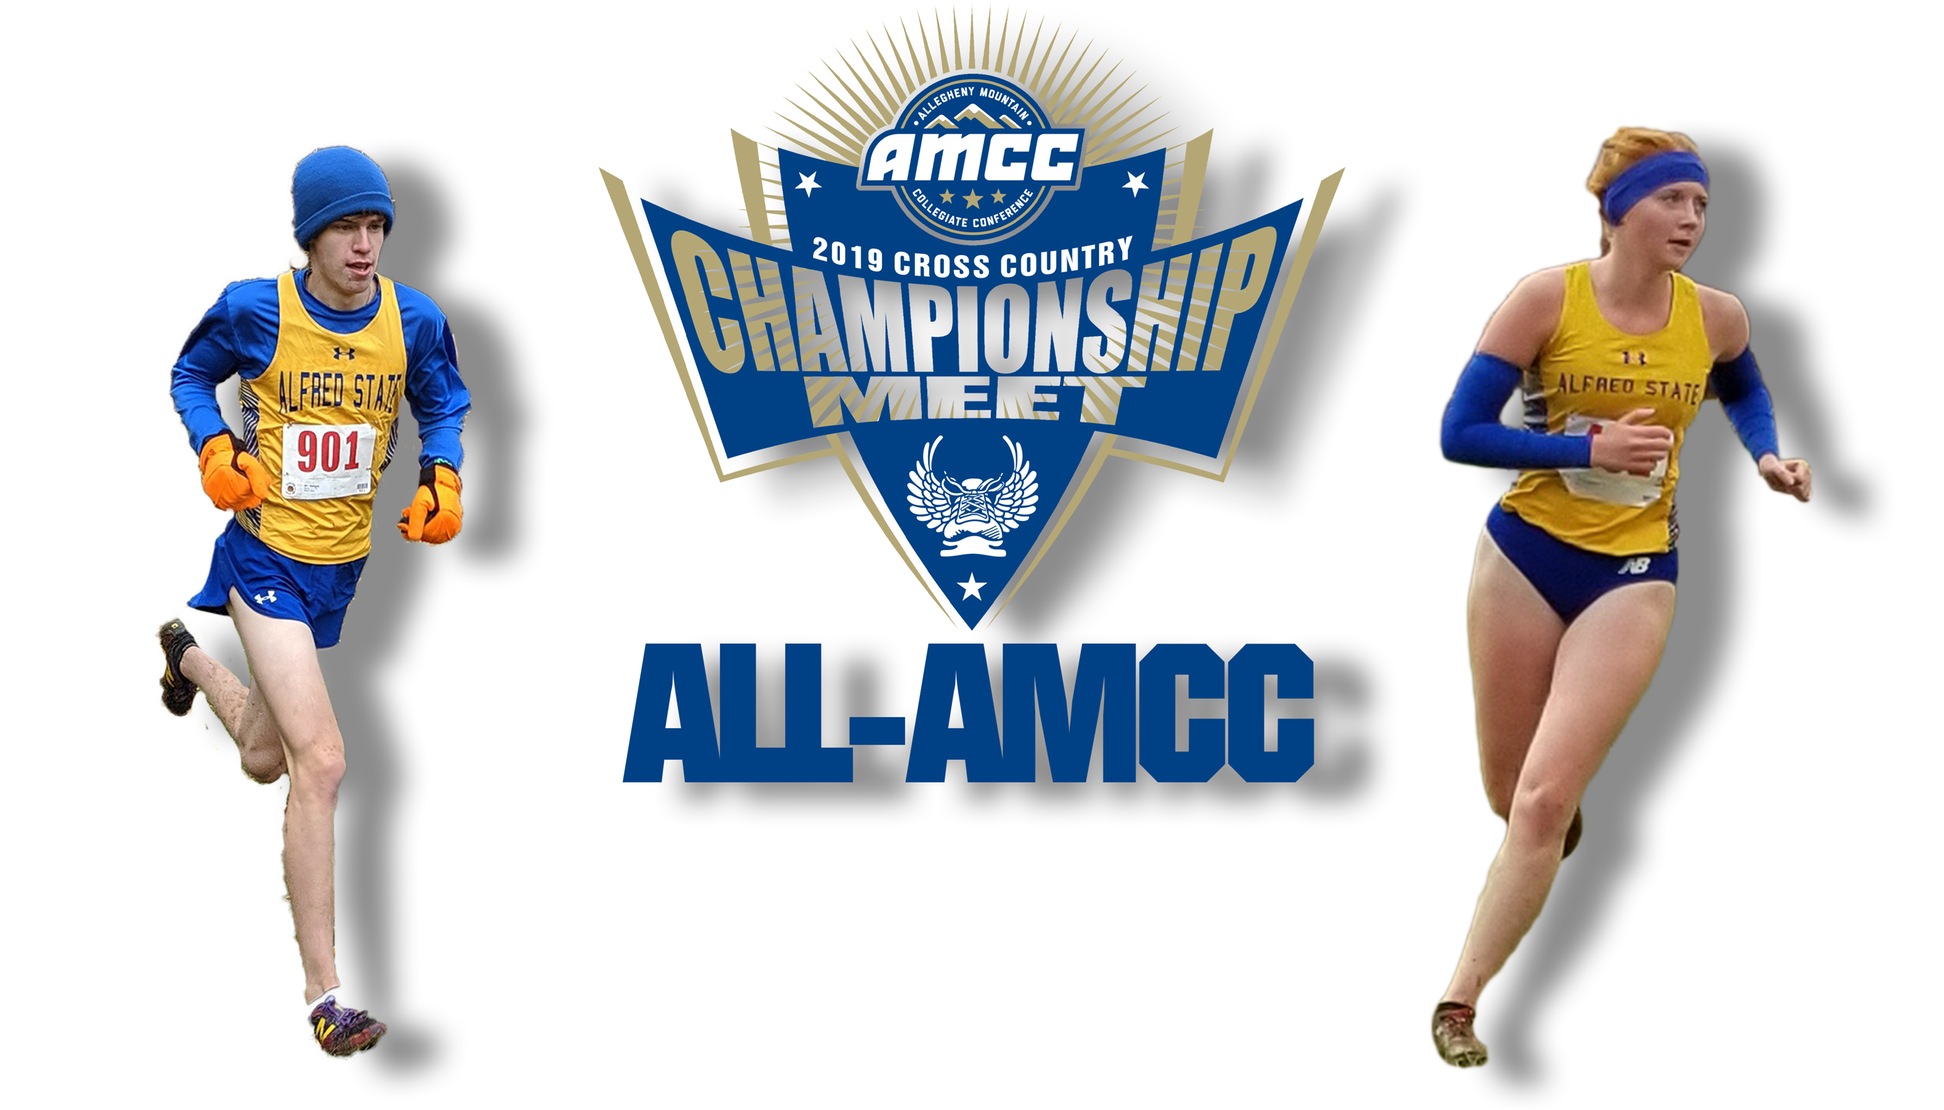 Caitlin Caltagirone and Gavin Bathgate named to Cross Country All-AMCC team.